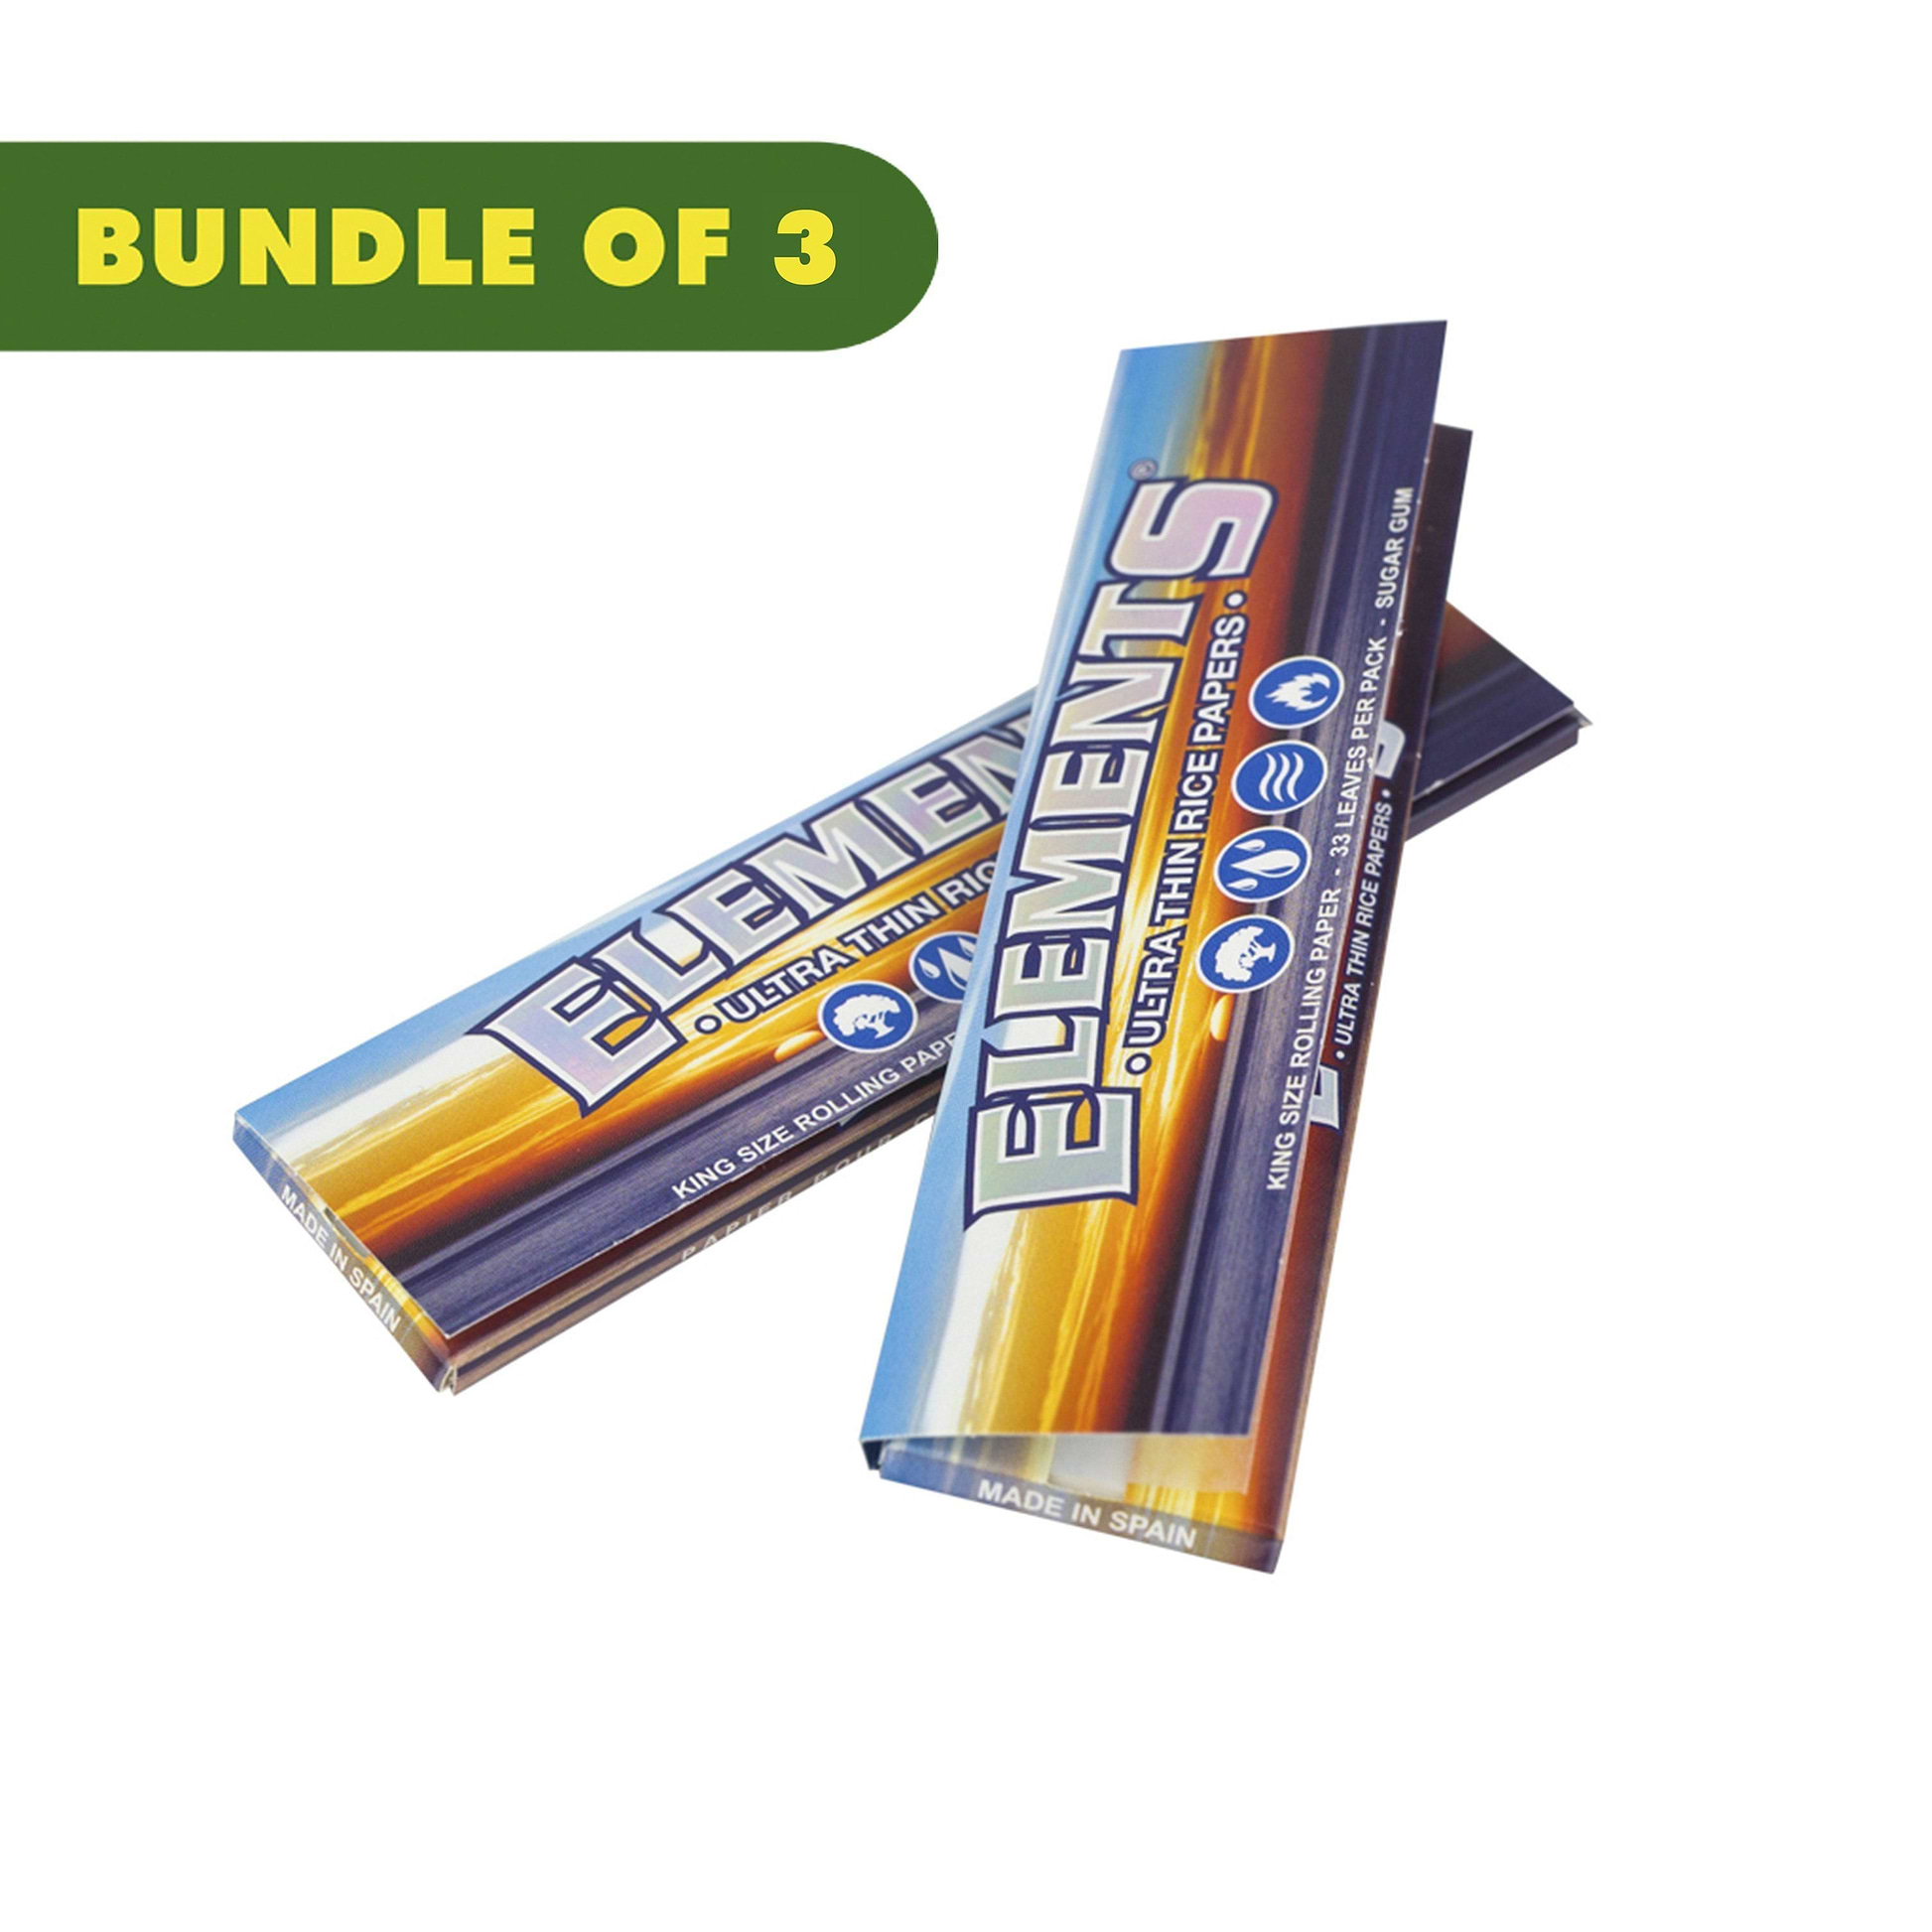 2 pack of closed ultra-thin rollings papers with classic Elements logo ocean and sunset image